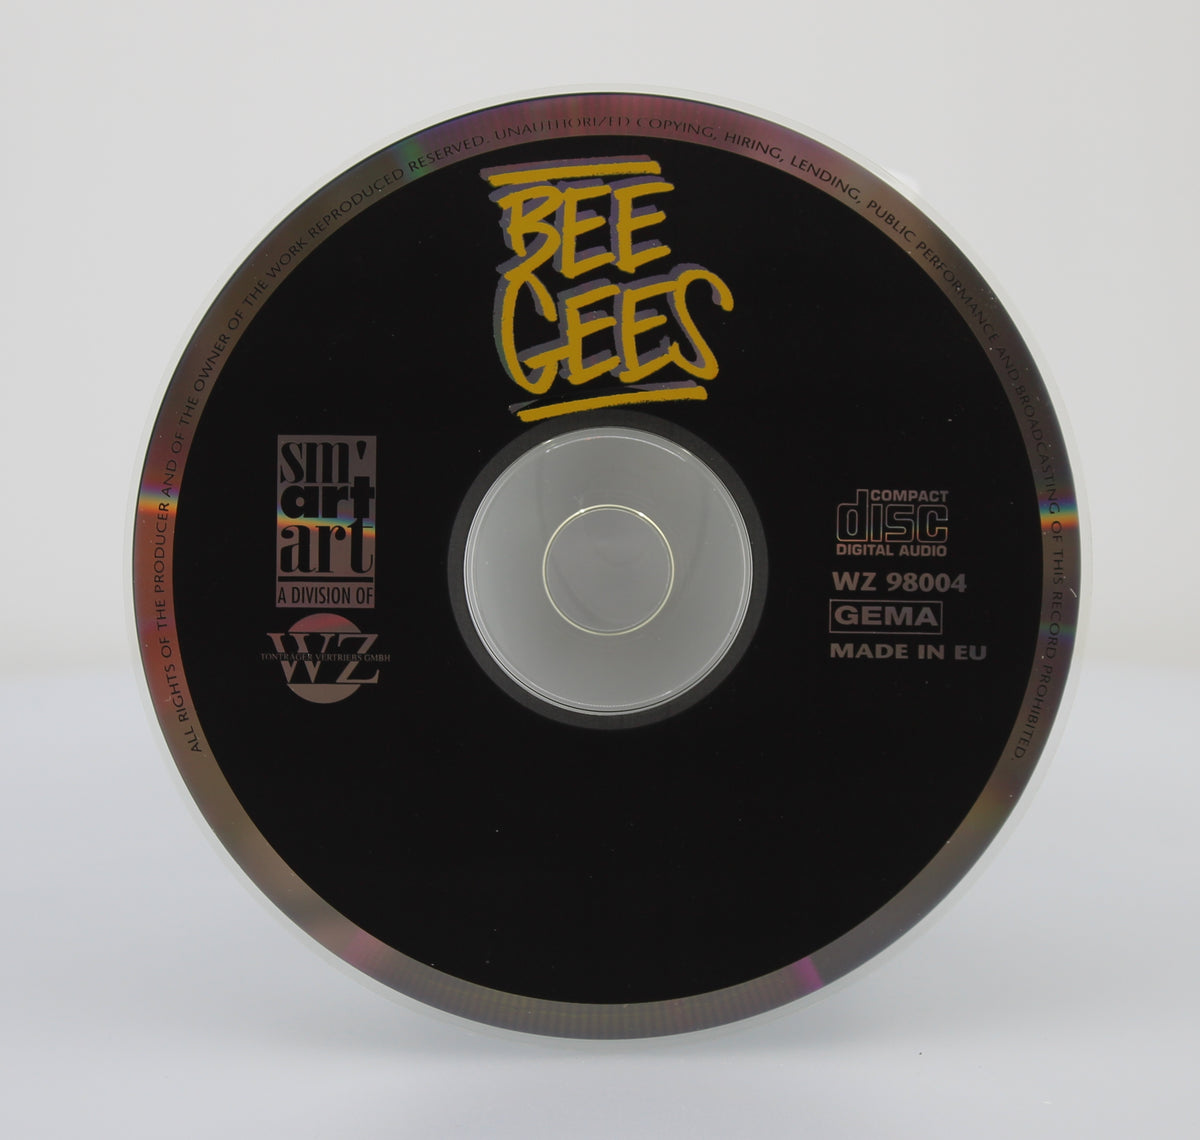 Bee Gees - Three Kisses Of Love, CD, Compilation, Germany 1995